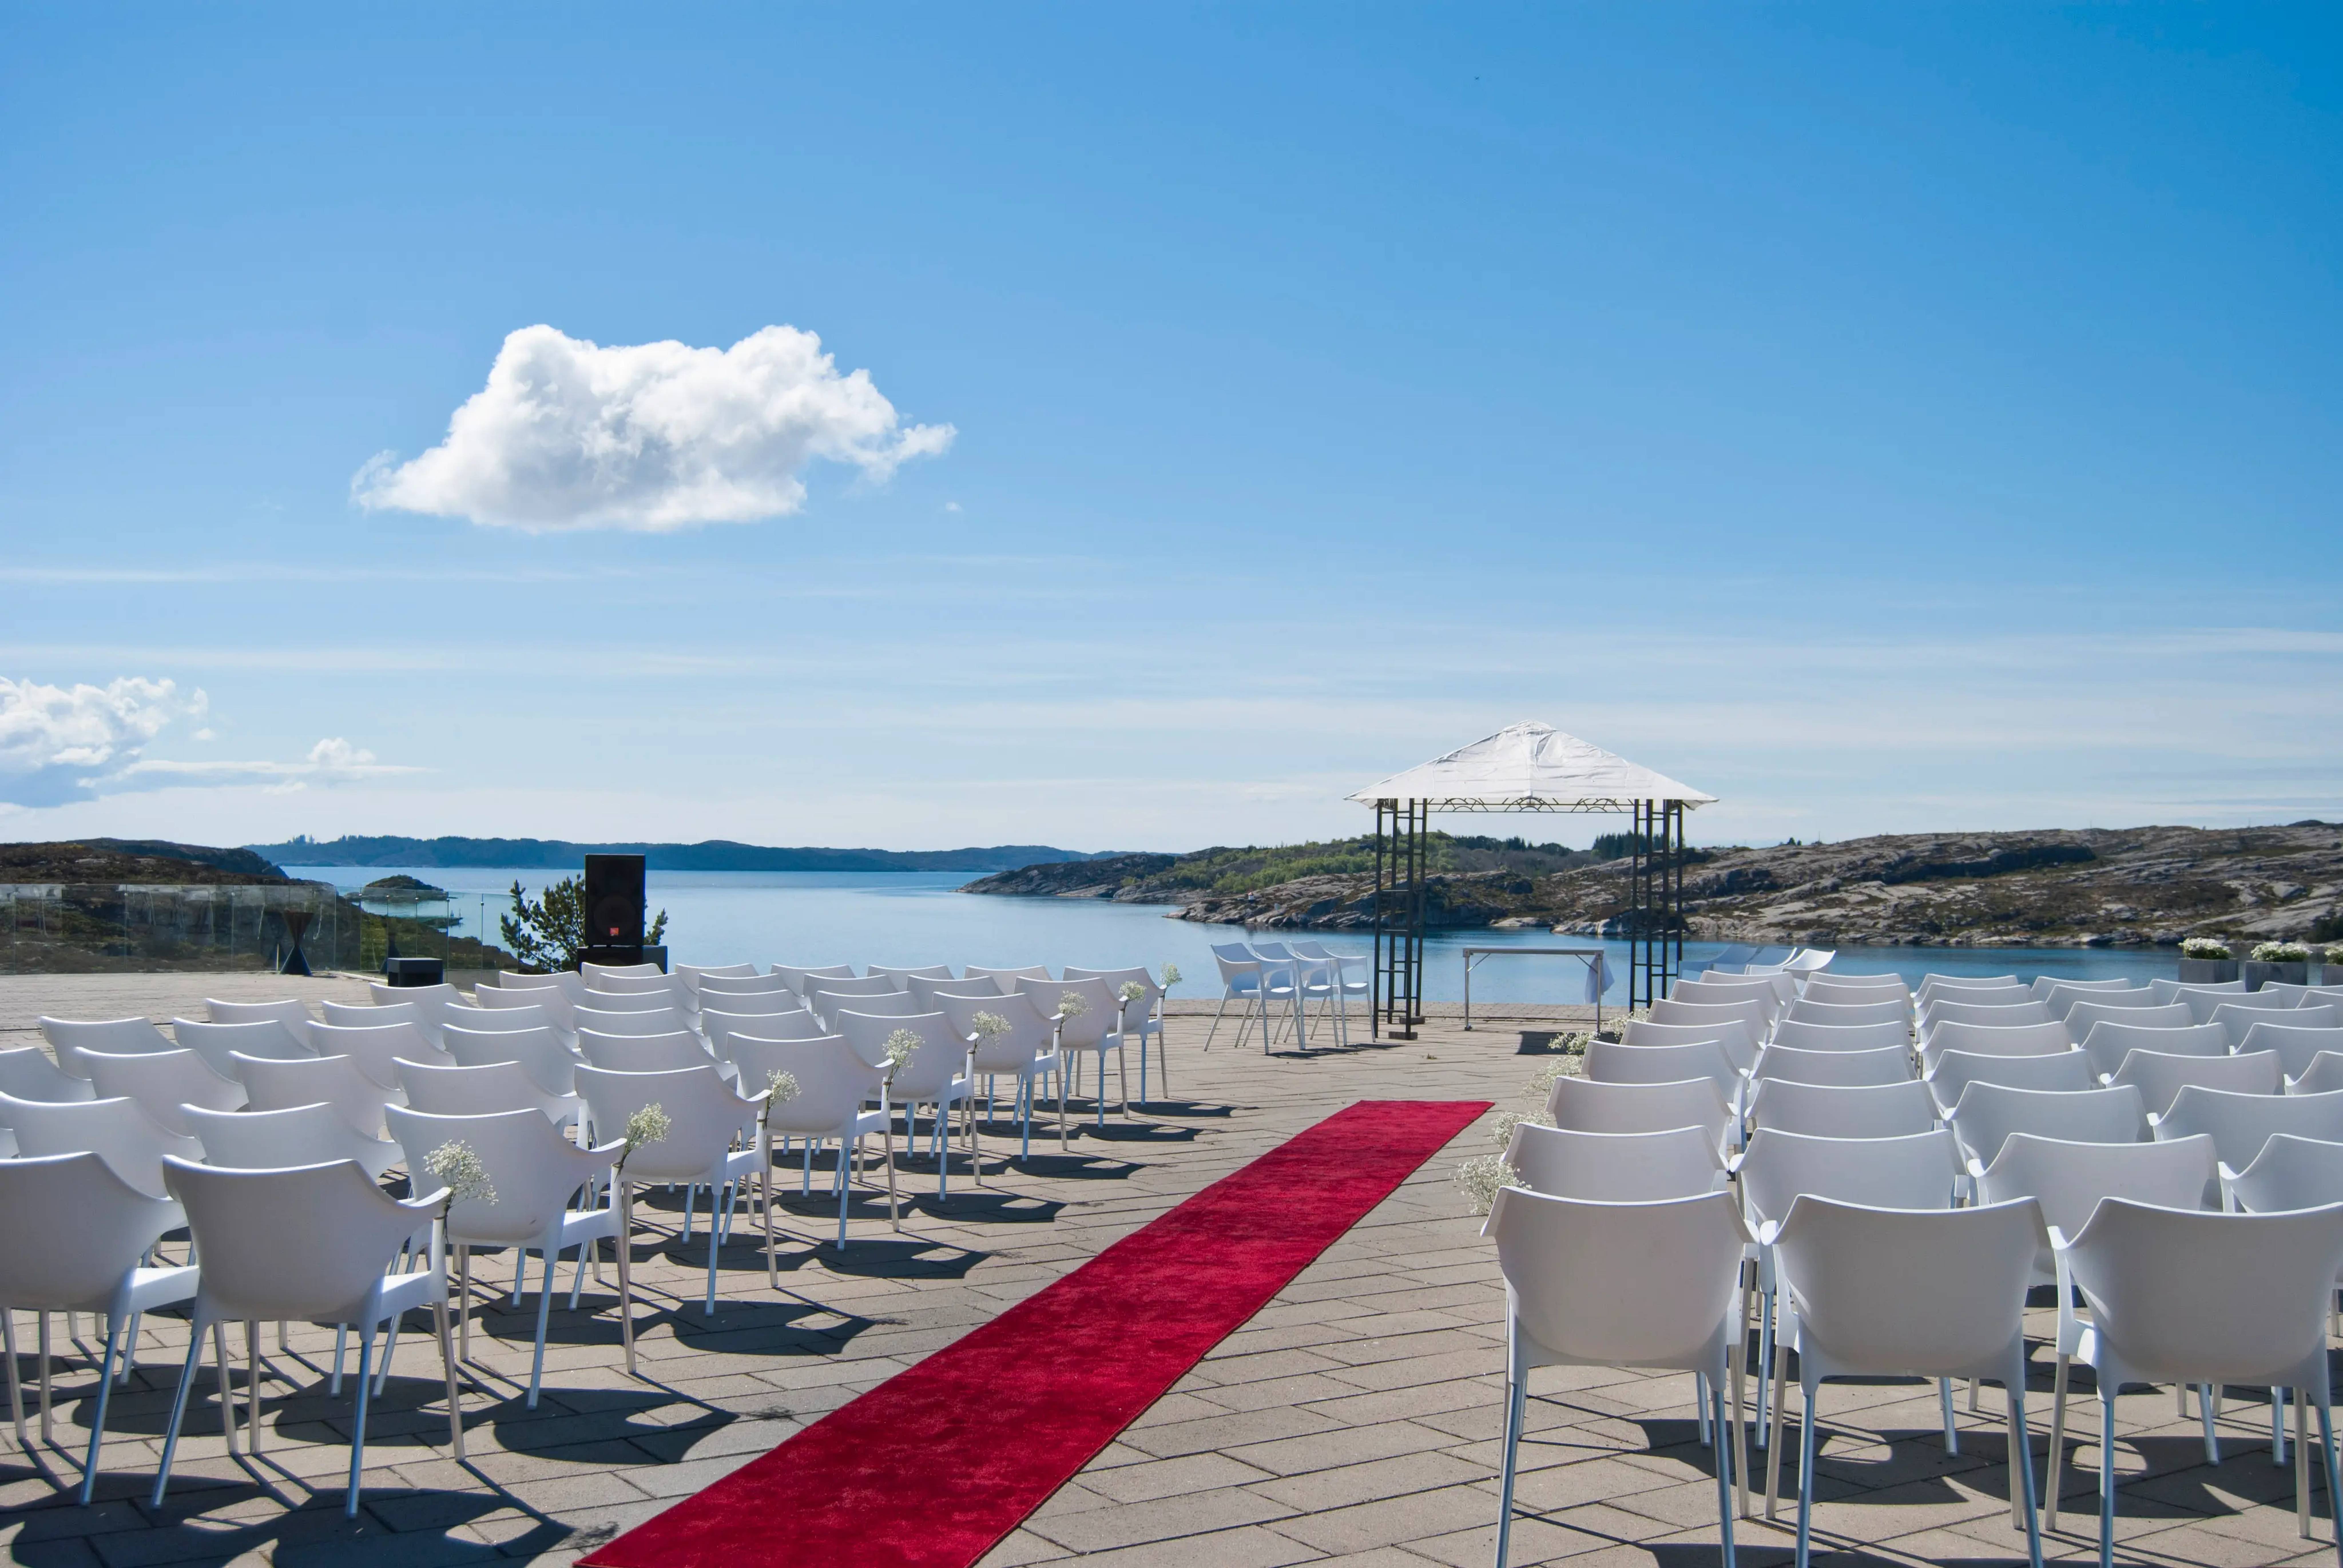 All set for a wedding cermony outside, with beautiful sea view